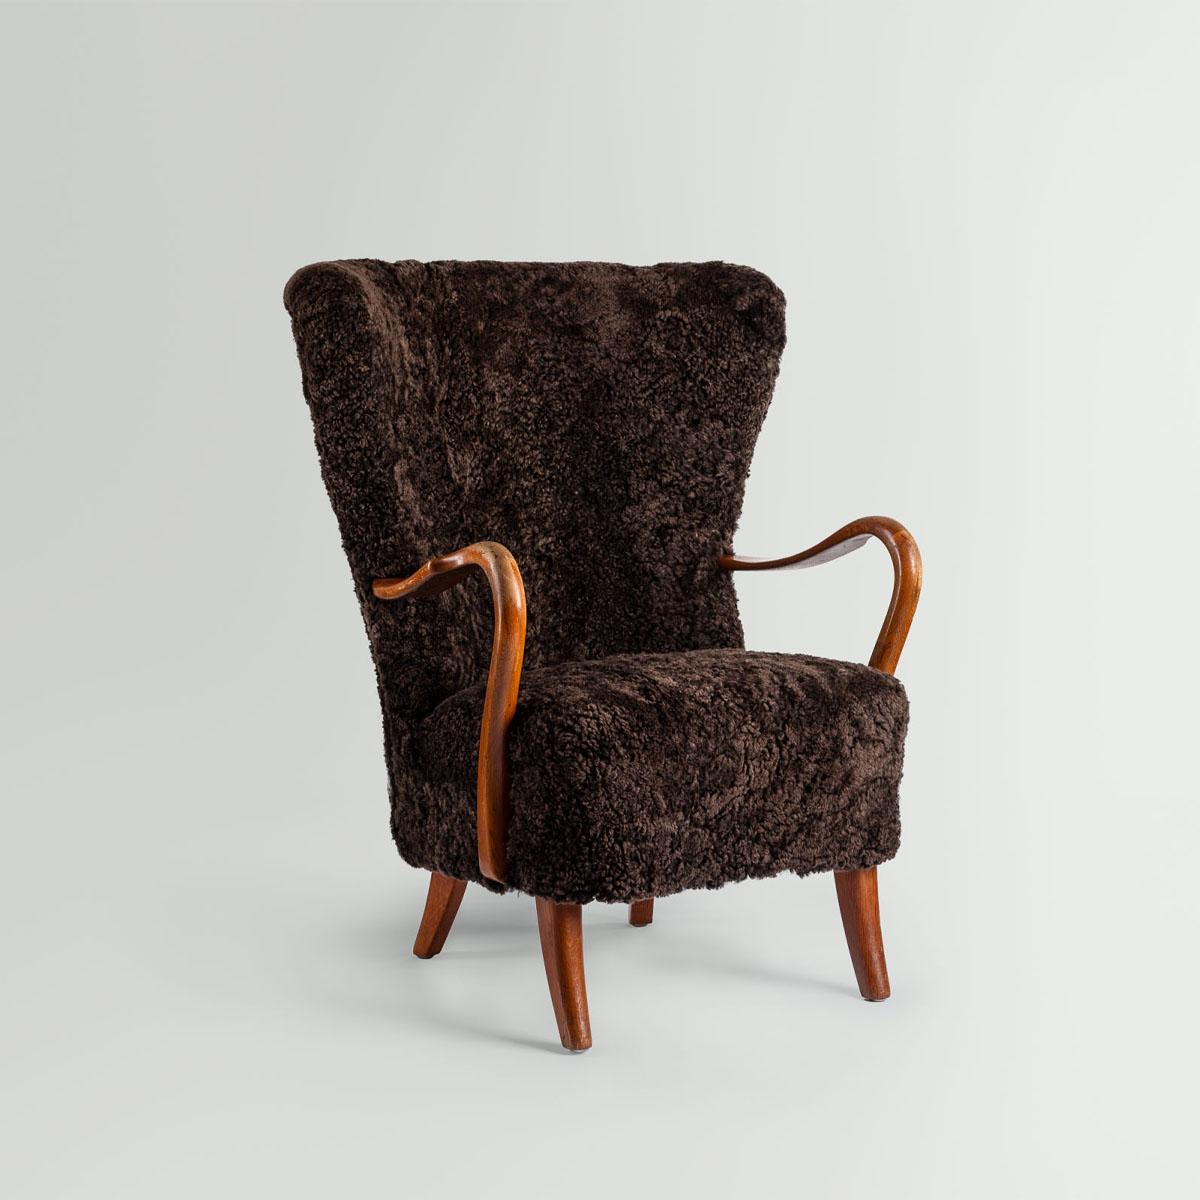 Danish high wingback lounge chair in brown sheepskin, designed by Danish designer Alfred Christensen for Slagelse Møbelfabrik in Denmark, 1940s.

This rare lounge chair is a wonderful example of Scandinavian Modern design of the 1940s, featuring an